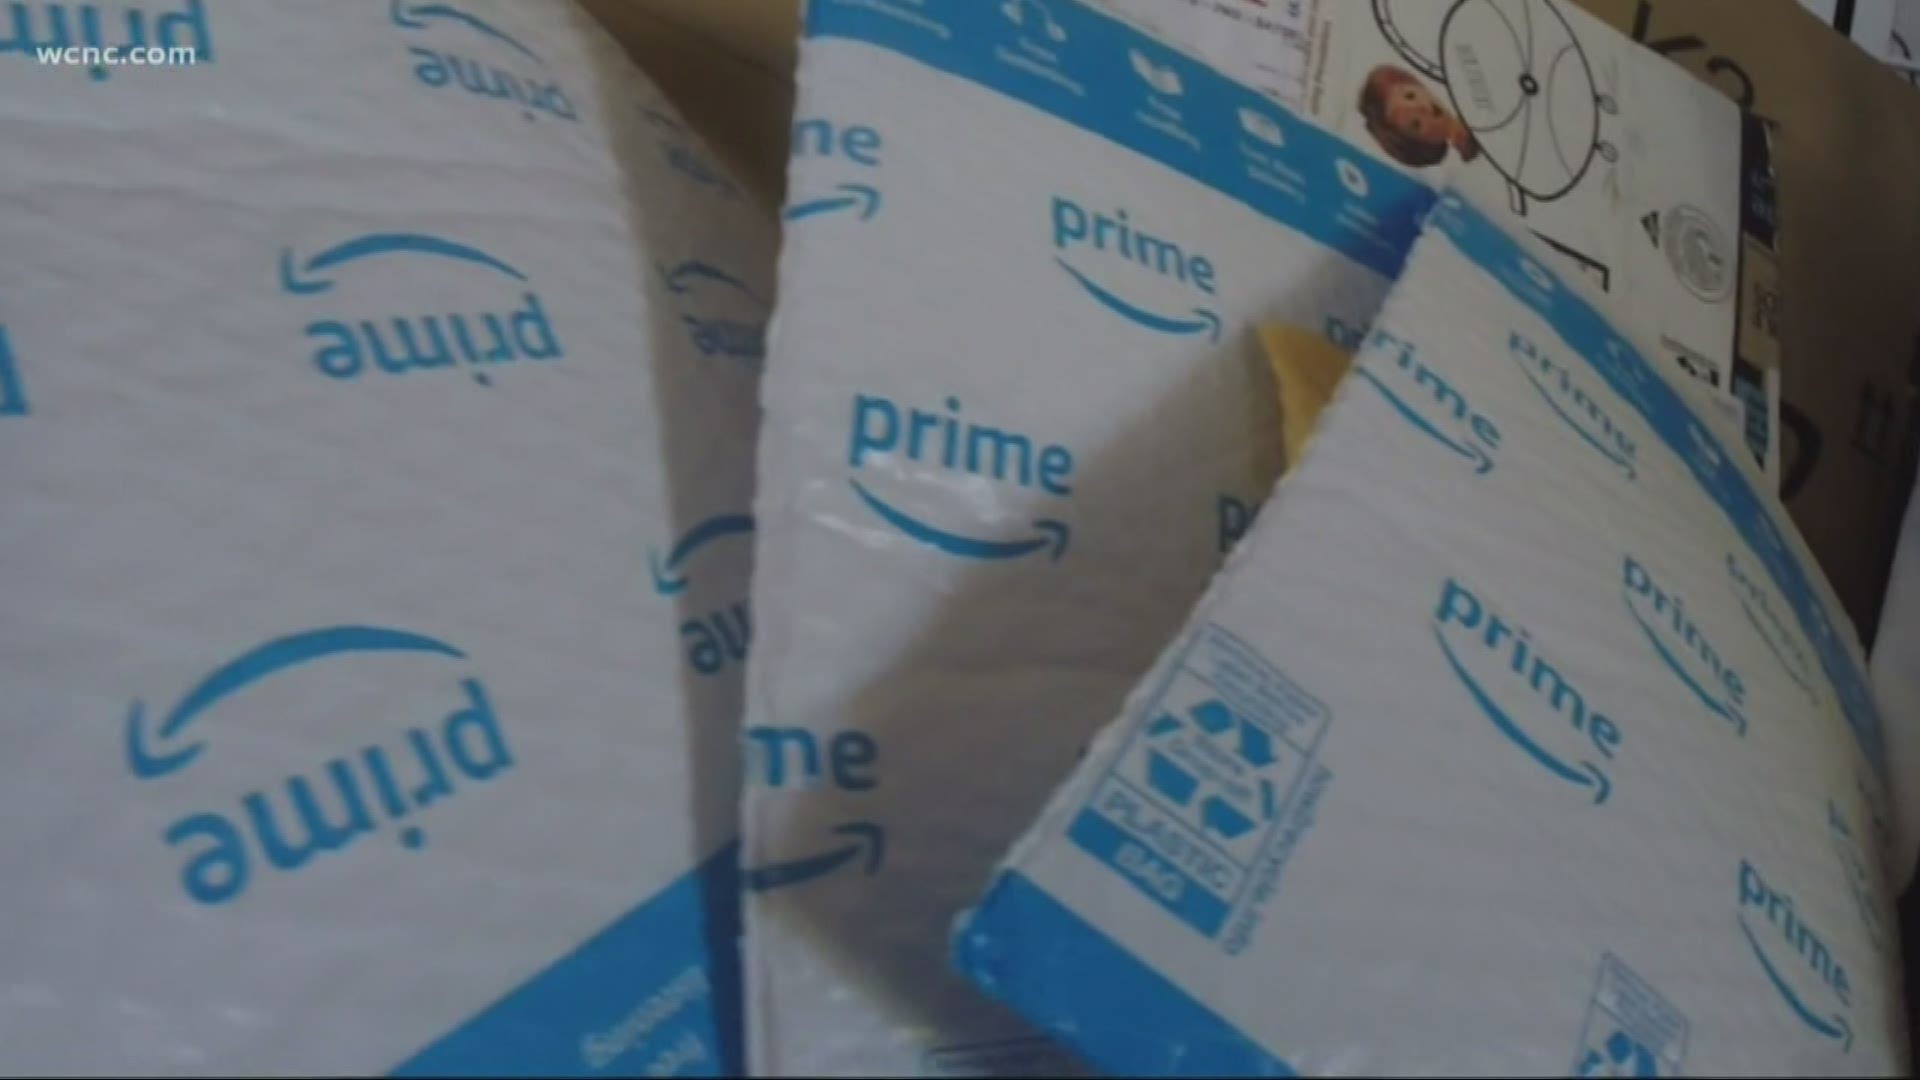 The Better Business Bureau (BBB) is warning it’s actually part of a scam called "Amazon brushing" intended to falsely inflate online reviews.